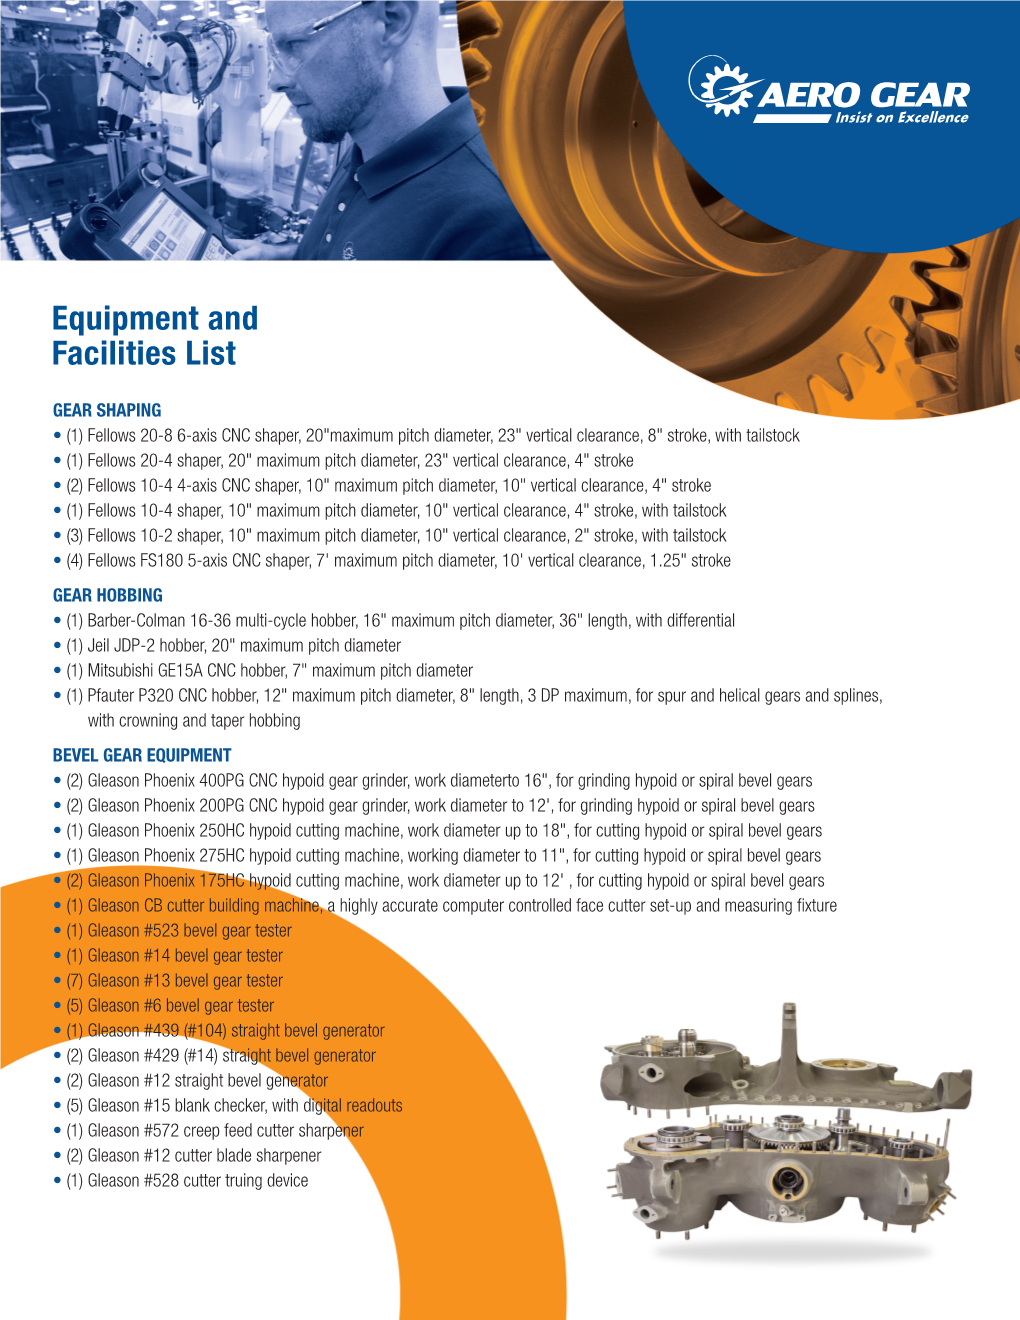 Equipment and Facilities List